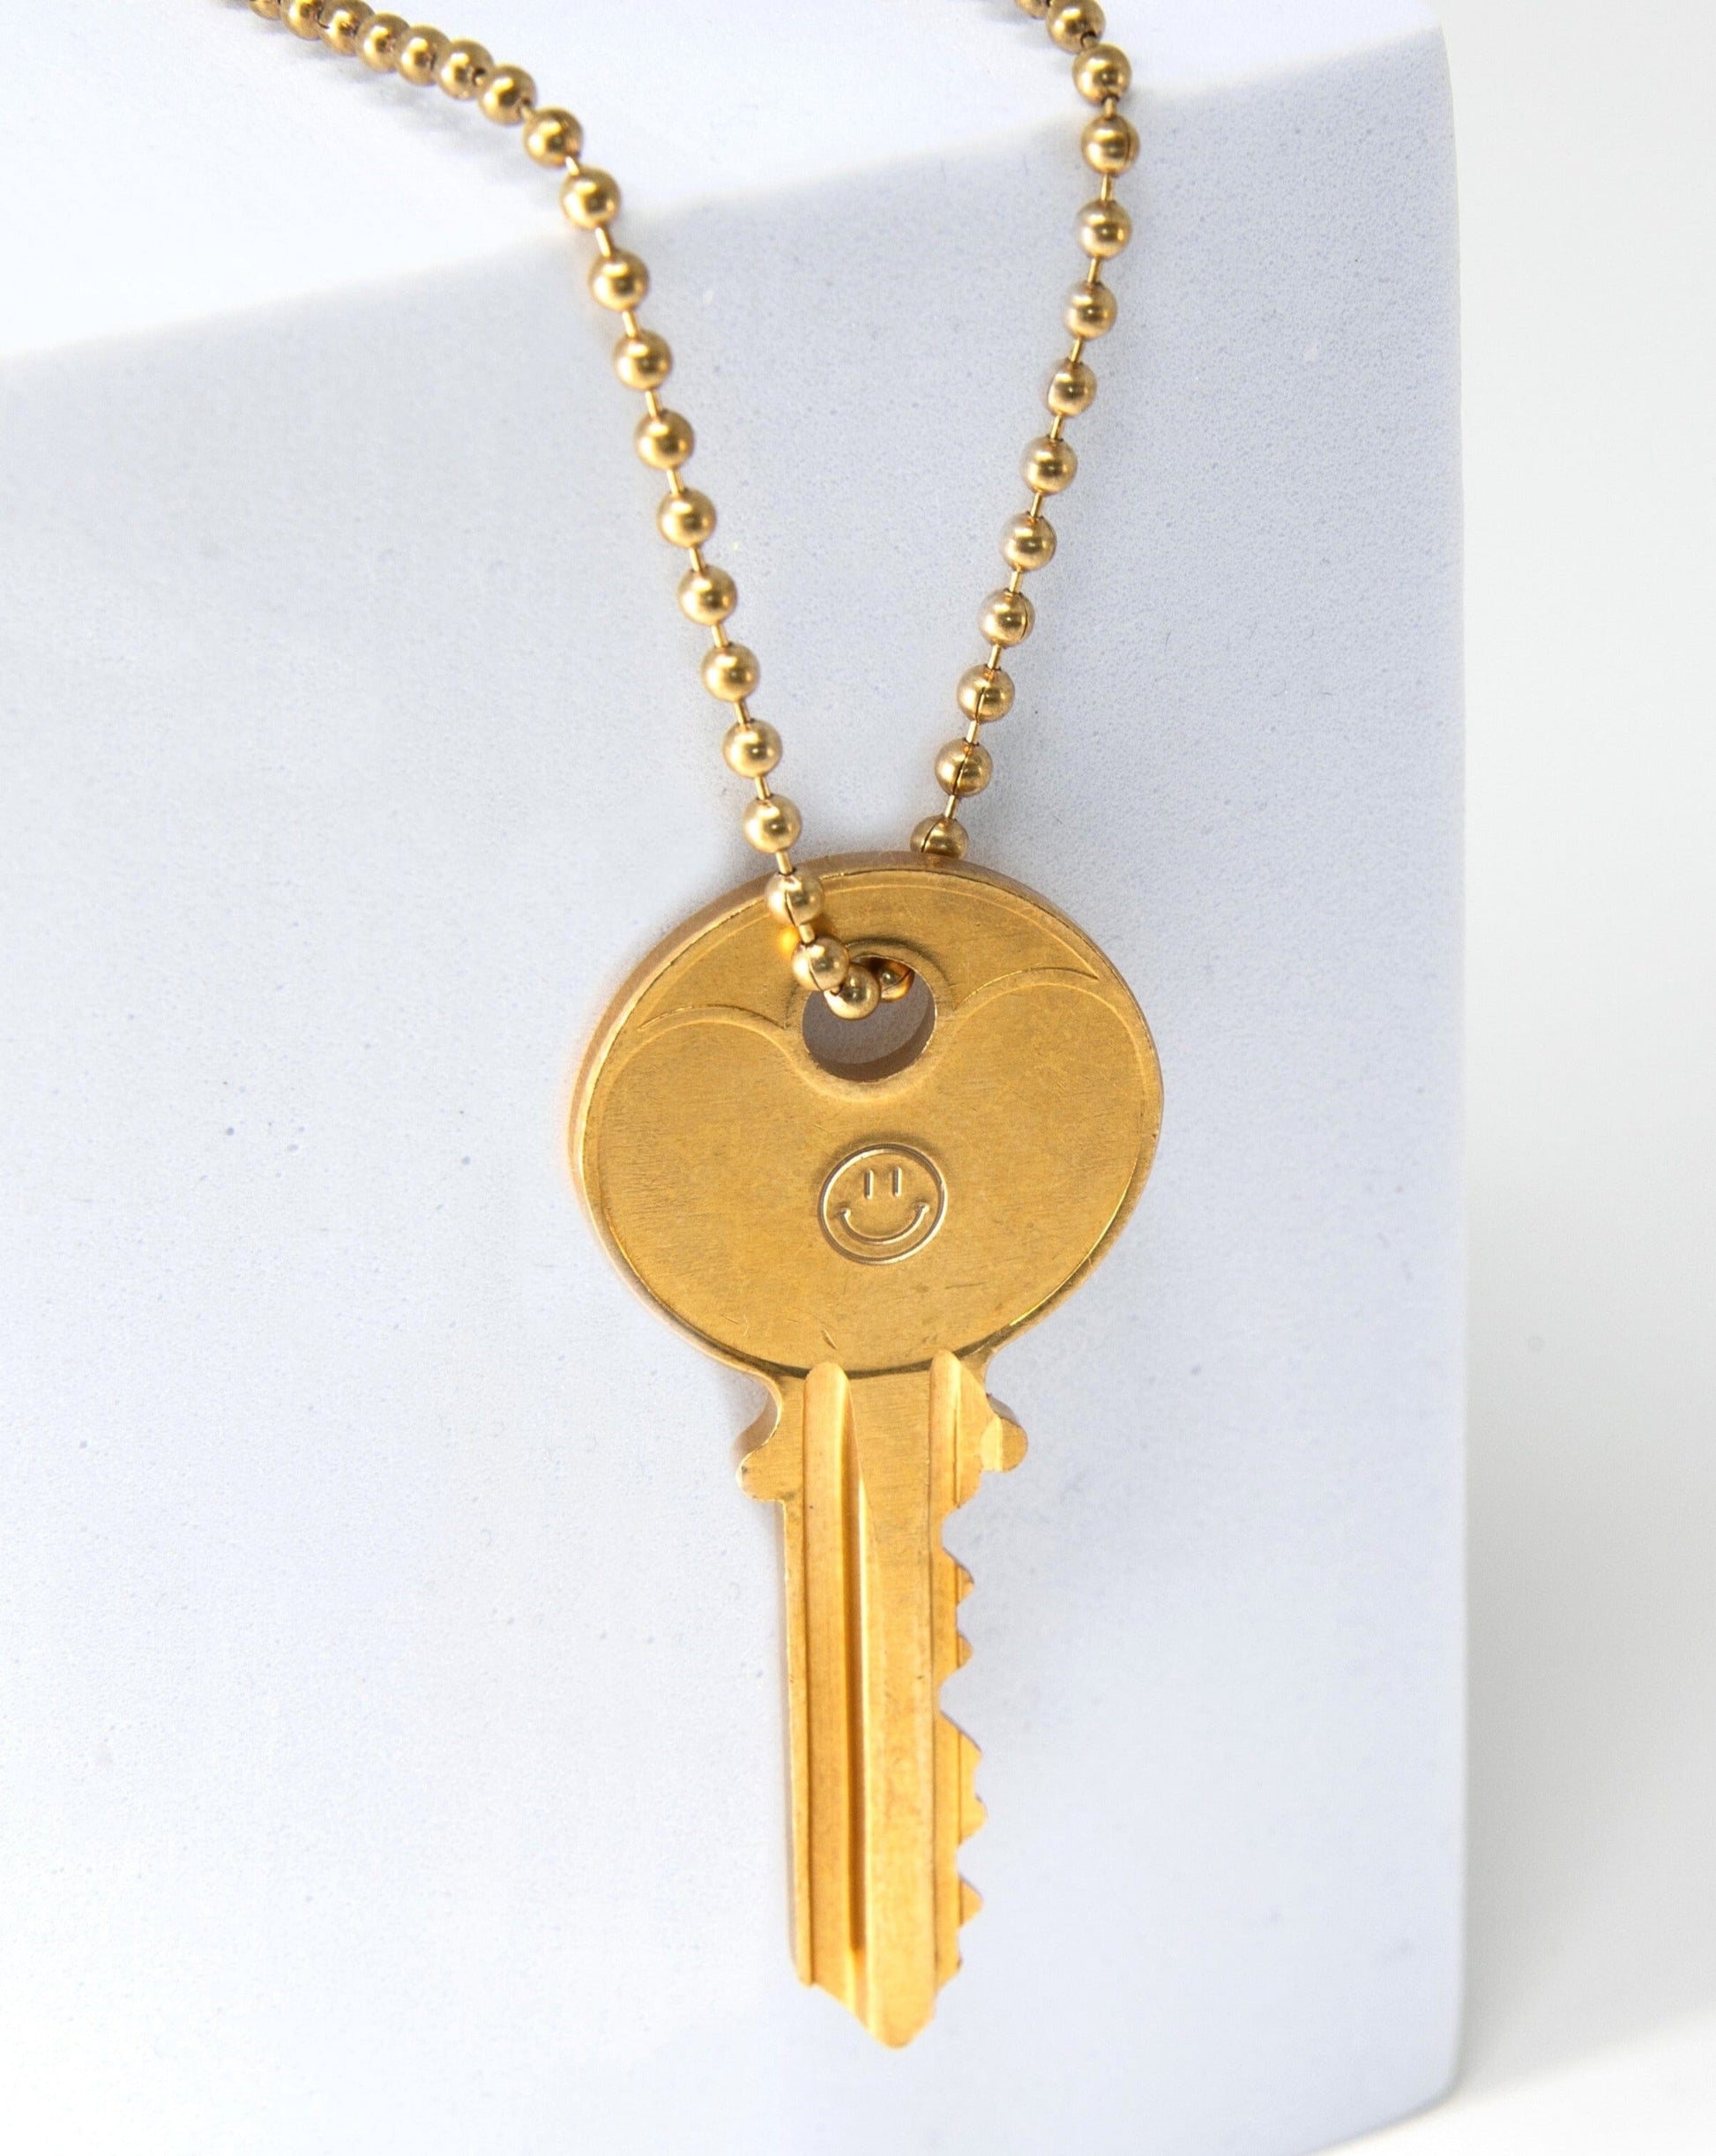 Symbol Classic Ball Chain Key Necklace Necklaces The Giving Keys SMILEY FACE Gold Ball 